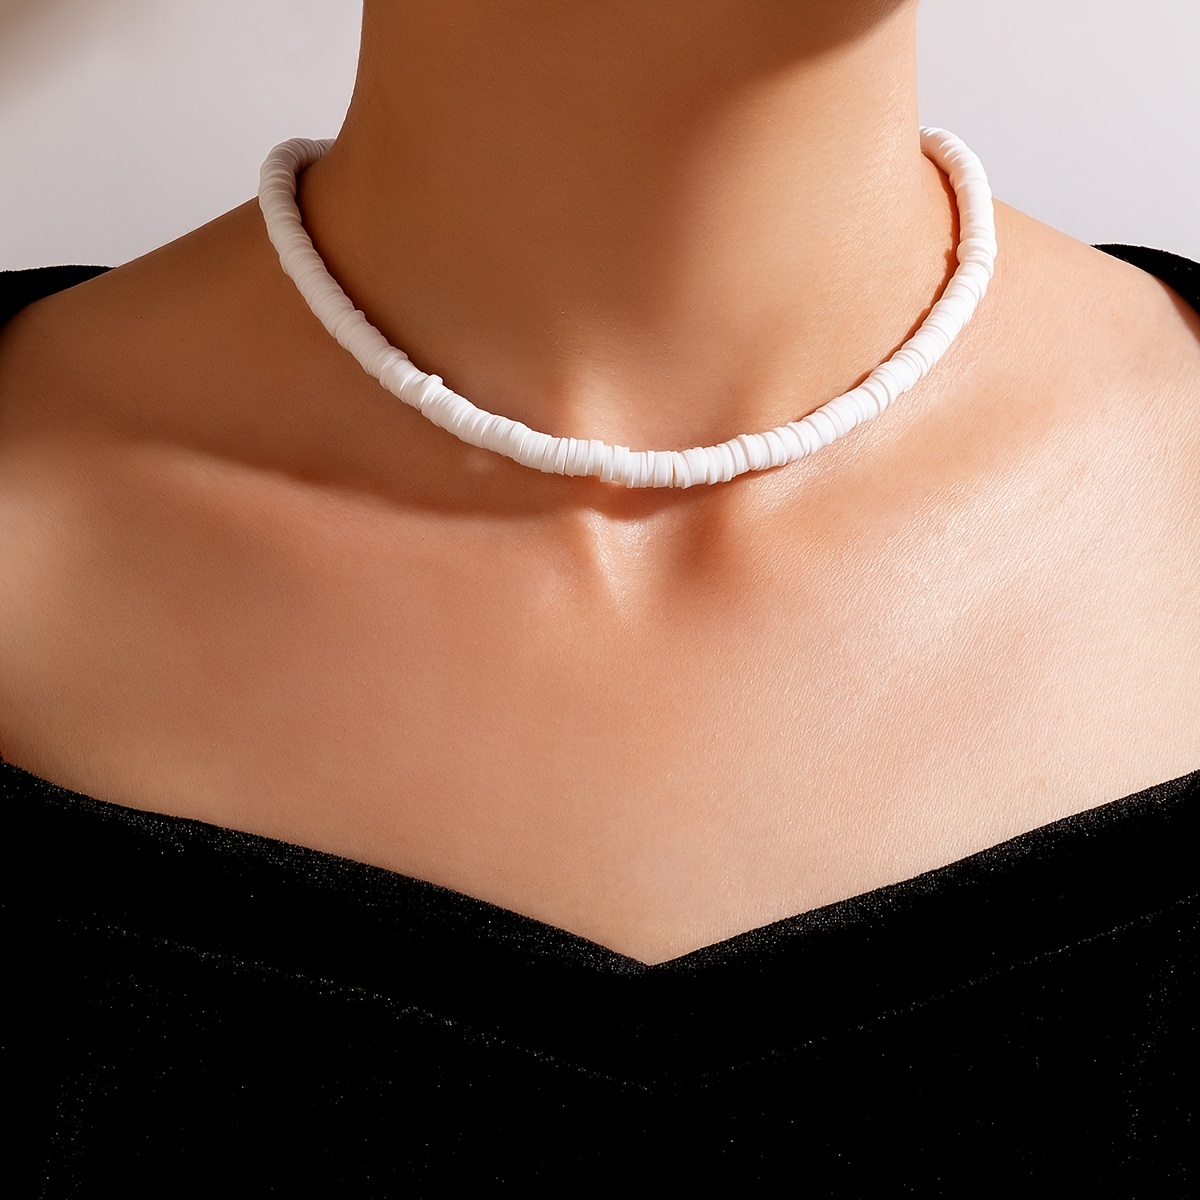 Choker Necklace Styles: Classic, Bohemian, and Everything In